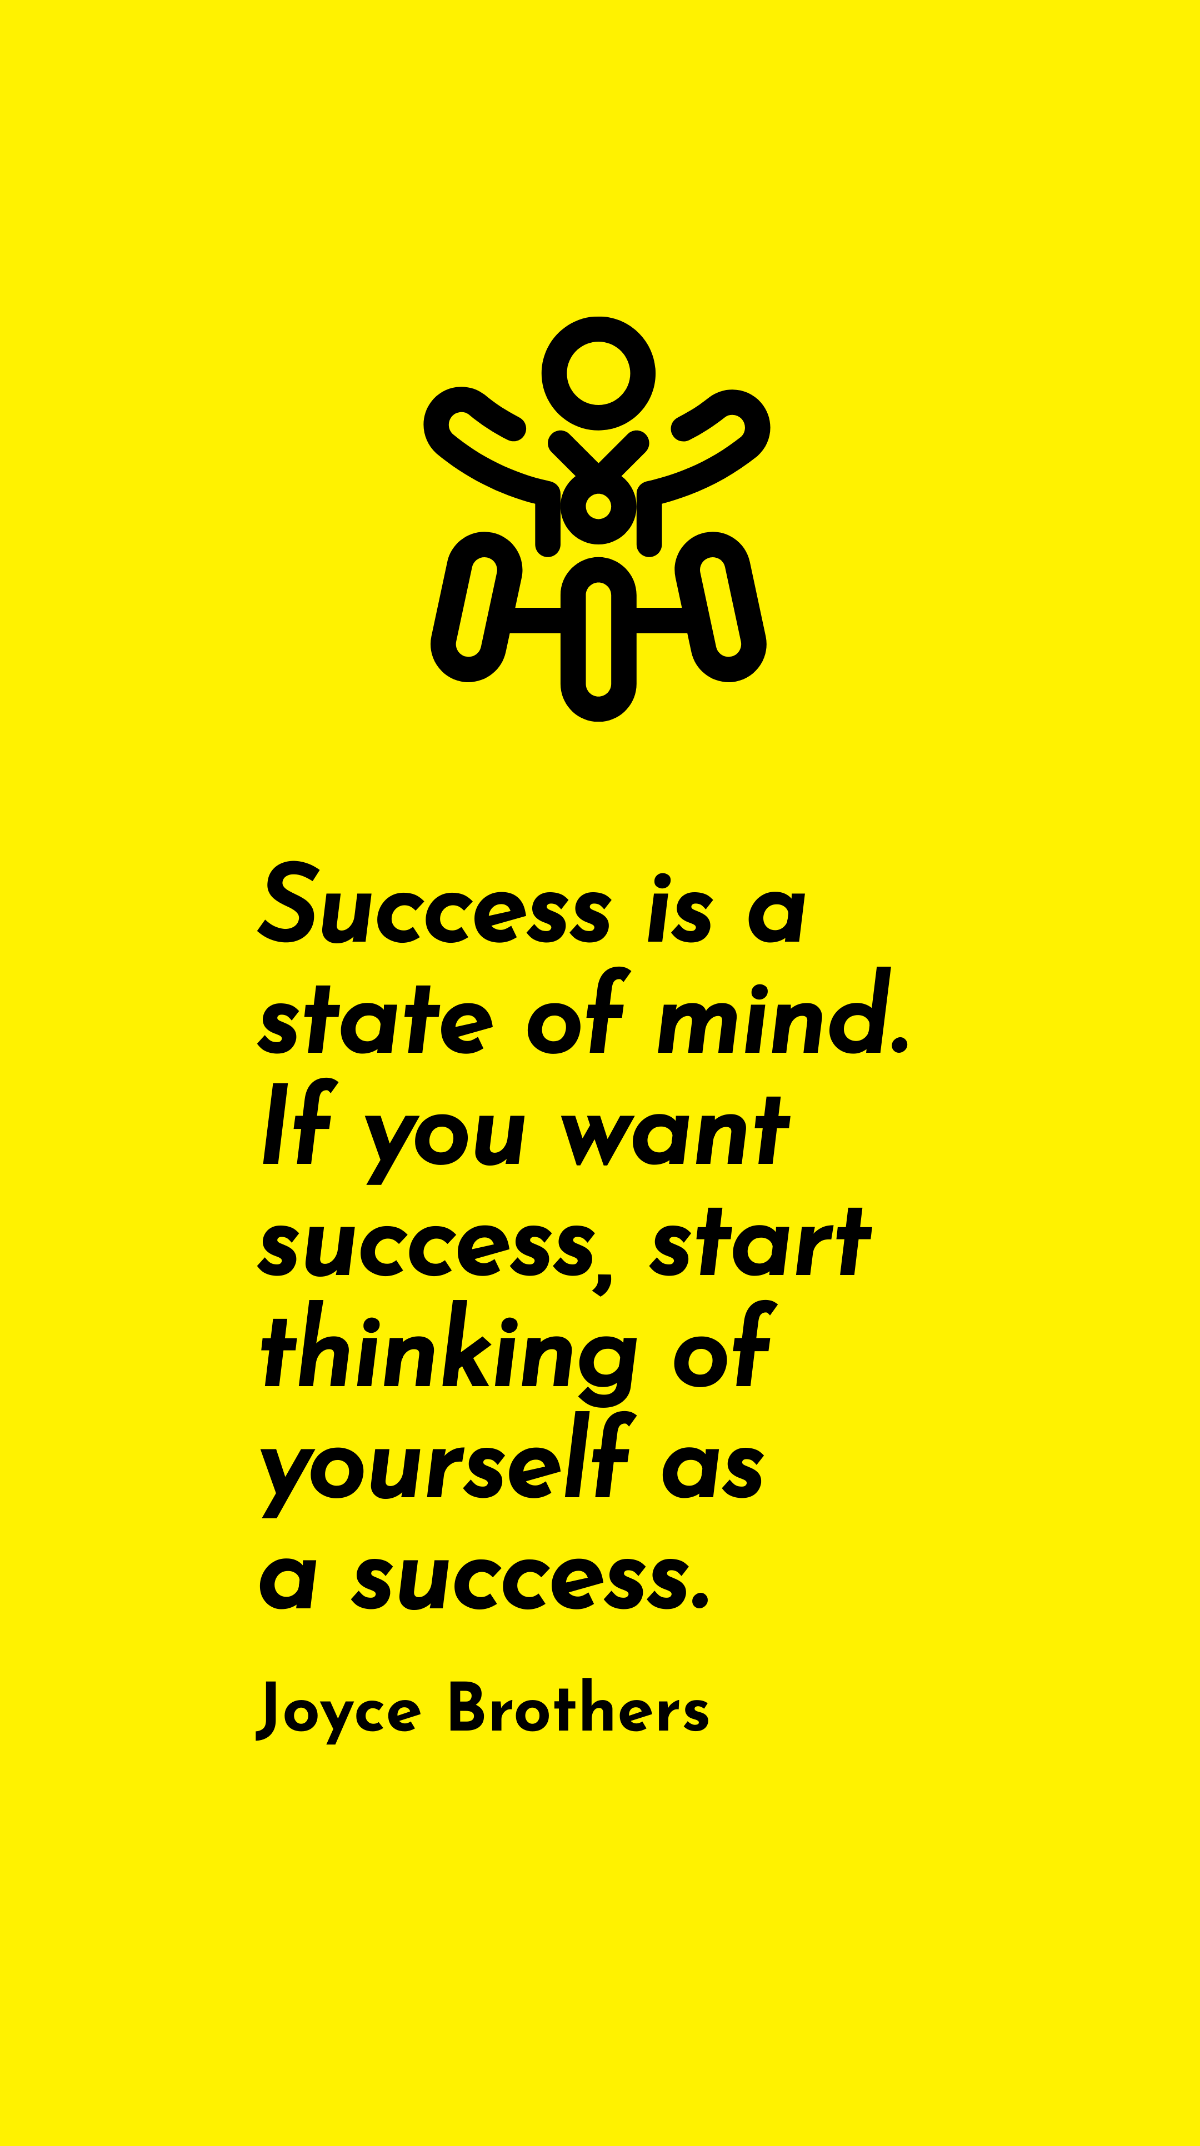 Joyce Brothers - Success is a state of mind. If you want success, start thinking of yourself as a success. Template